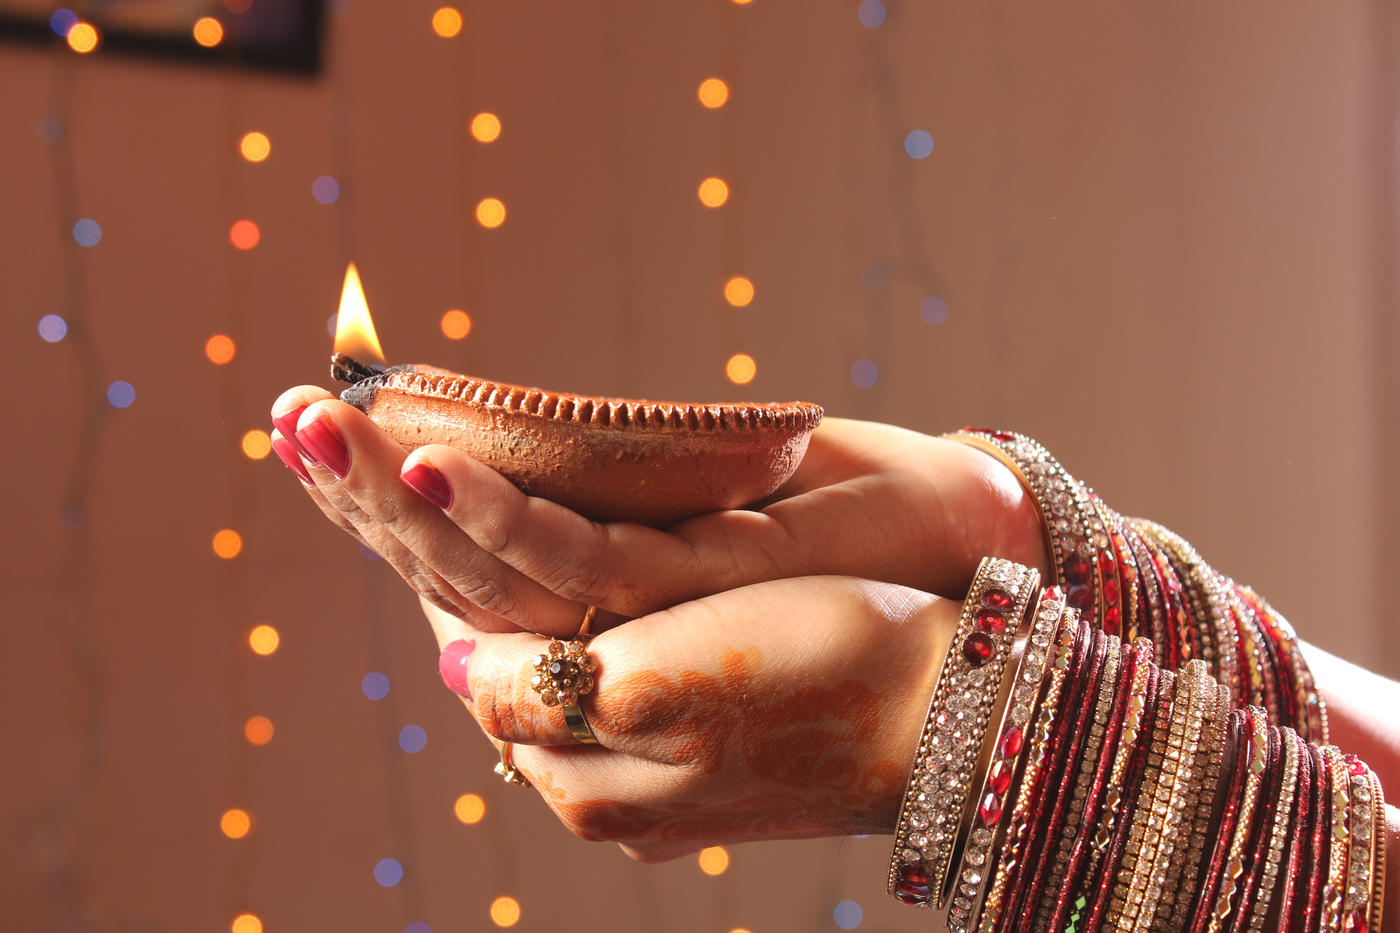 Hands holding a candle for Diwali